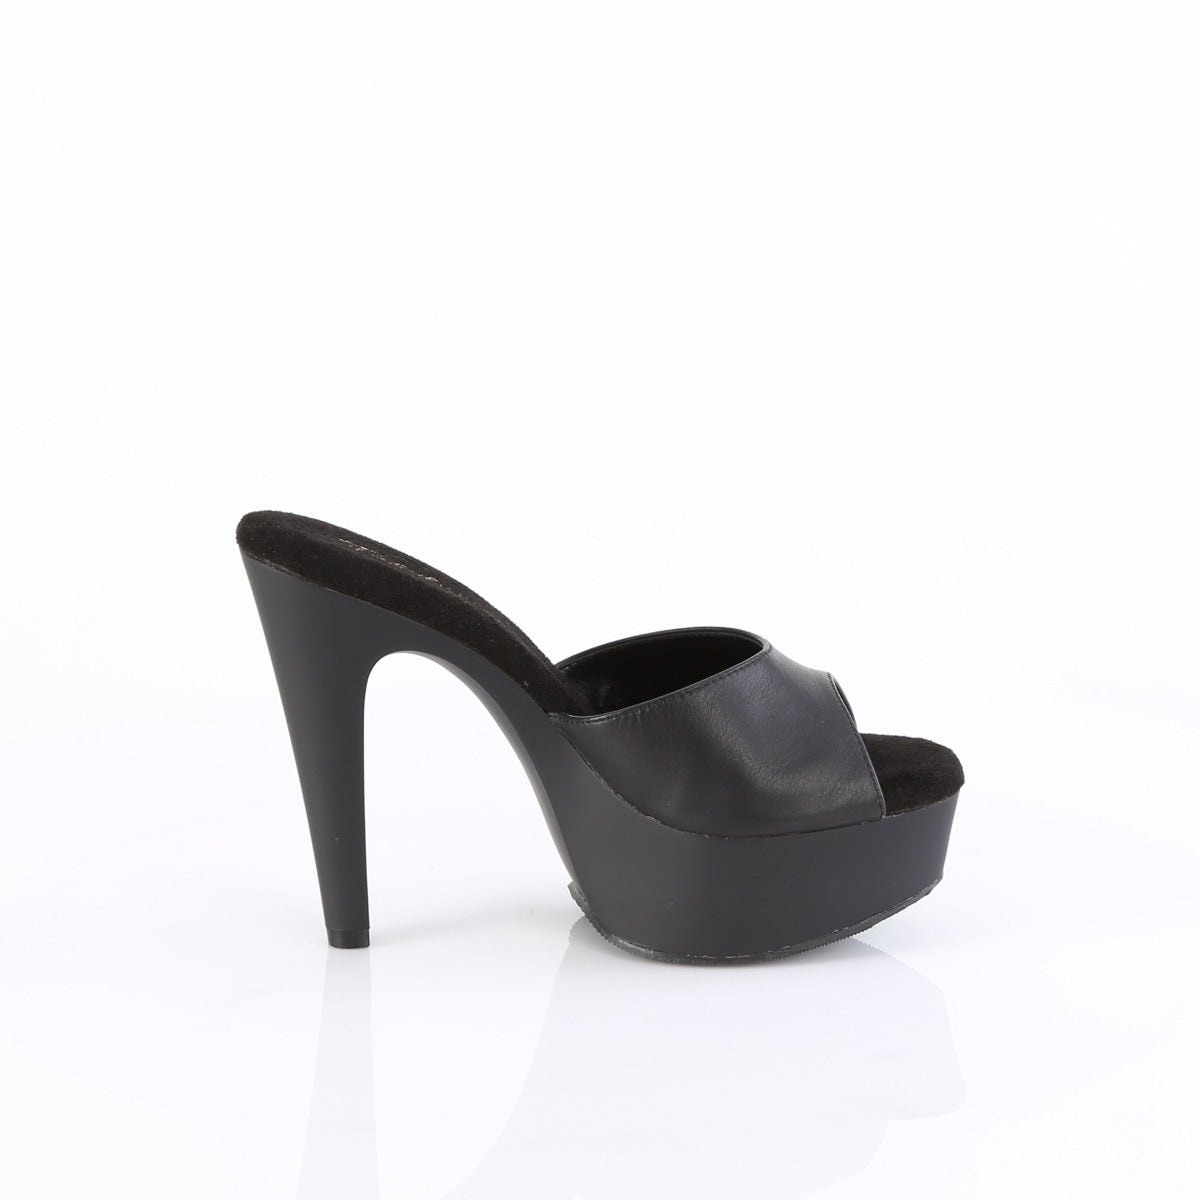 MARTINI-501 Fabulicious Black Faux Leather/Black Matte Shoes [Sexy Shoes]